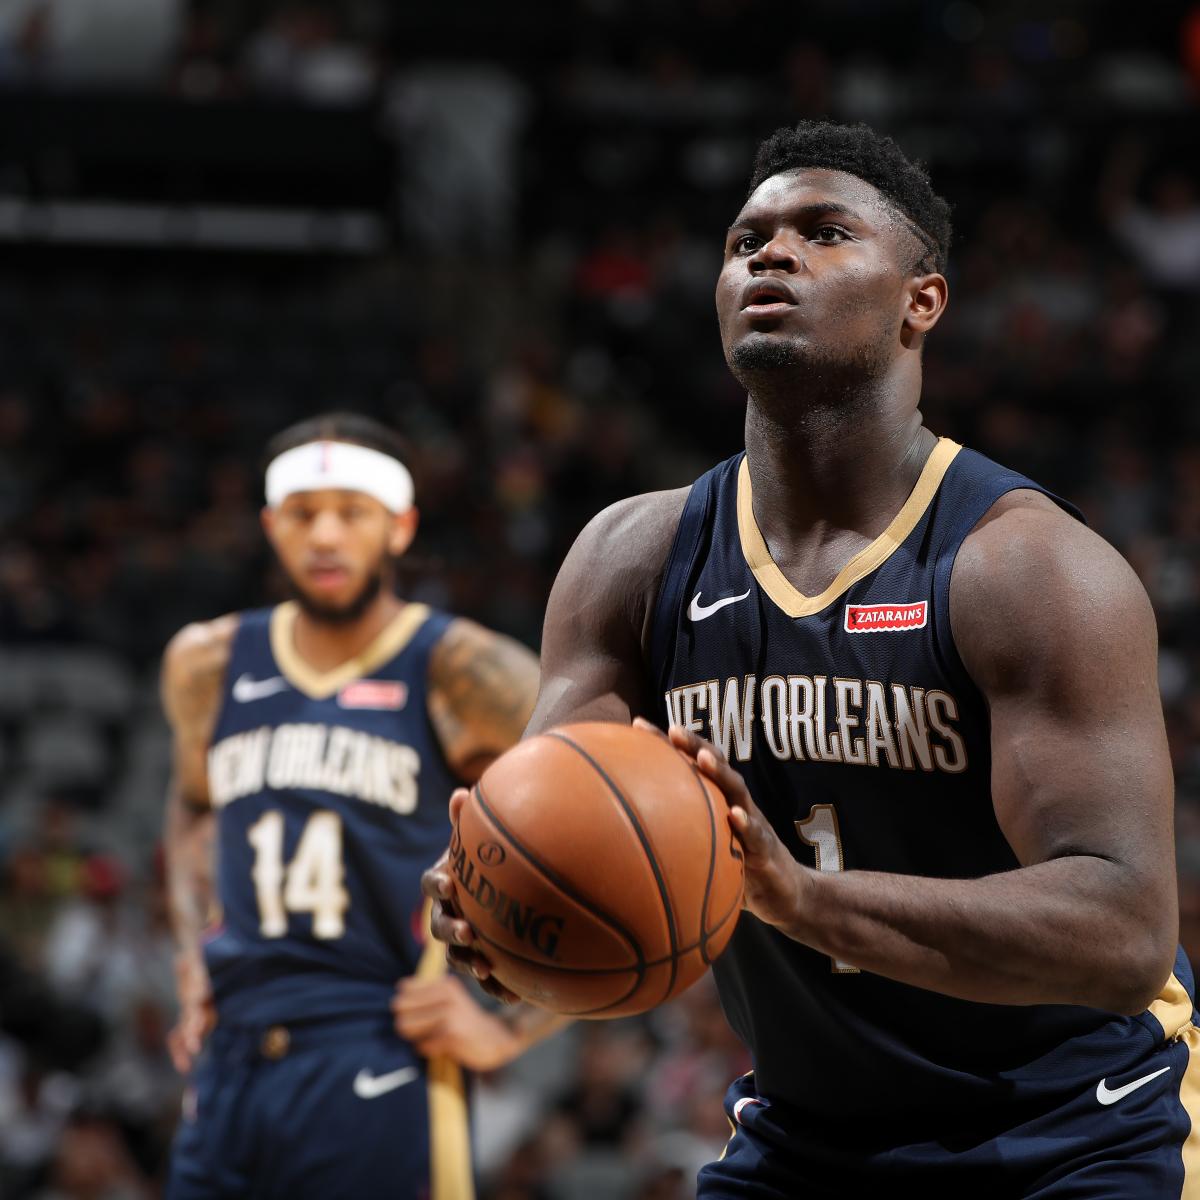 Report: Pelicans' Zion Williamson to Miss 'Period of Weeks' with Knee Injury